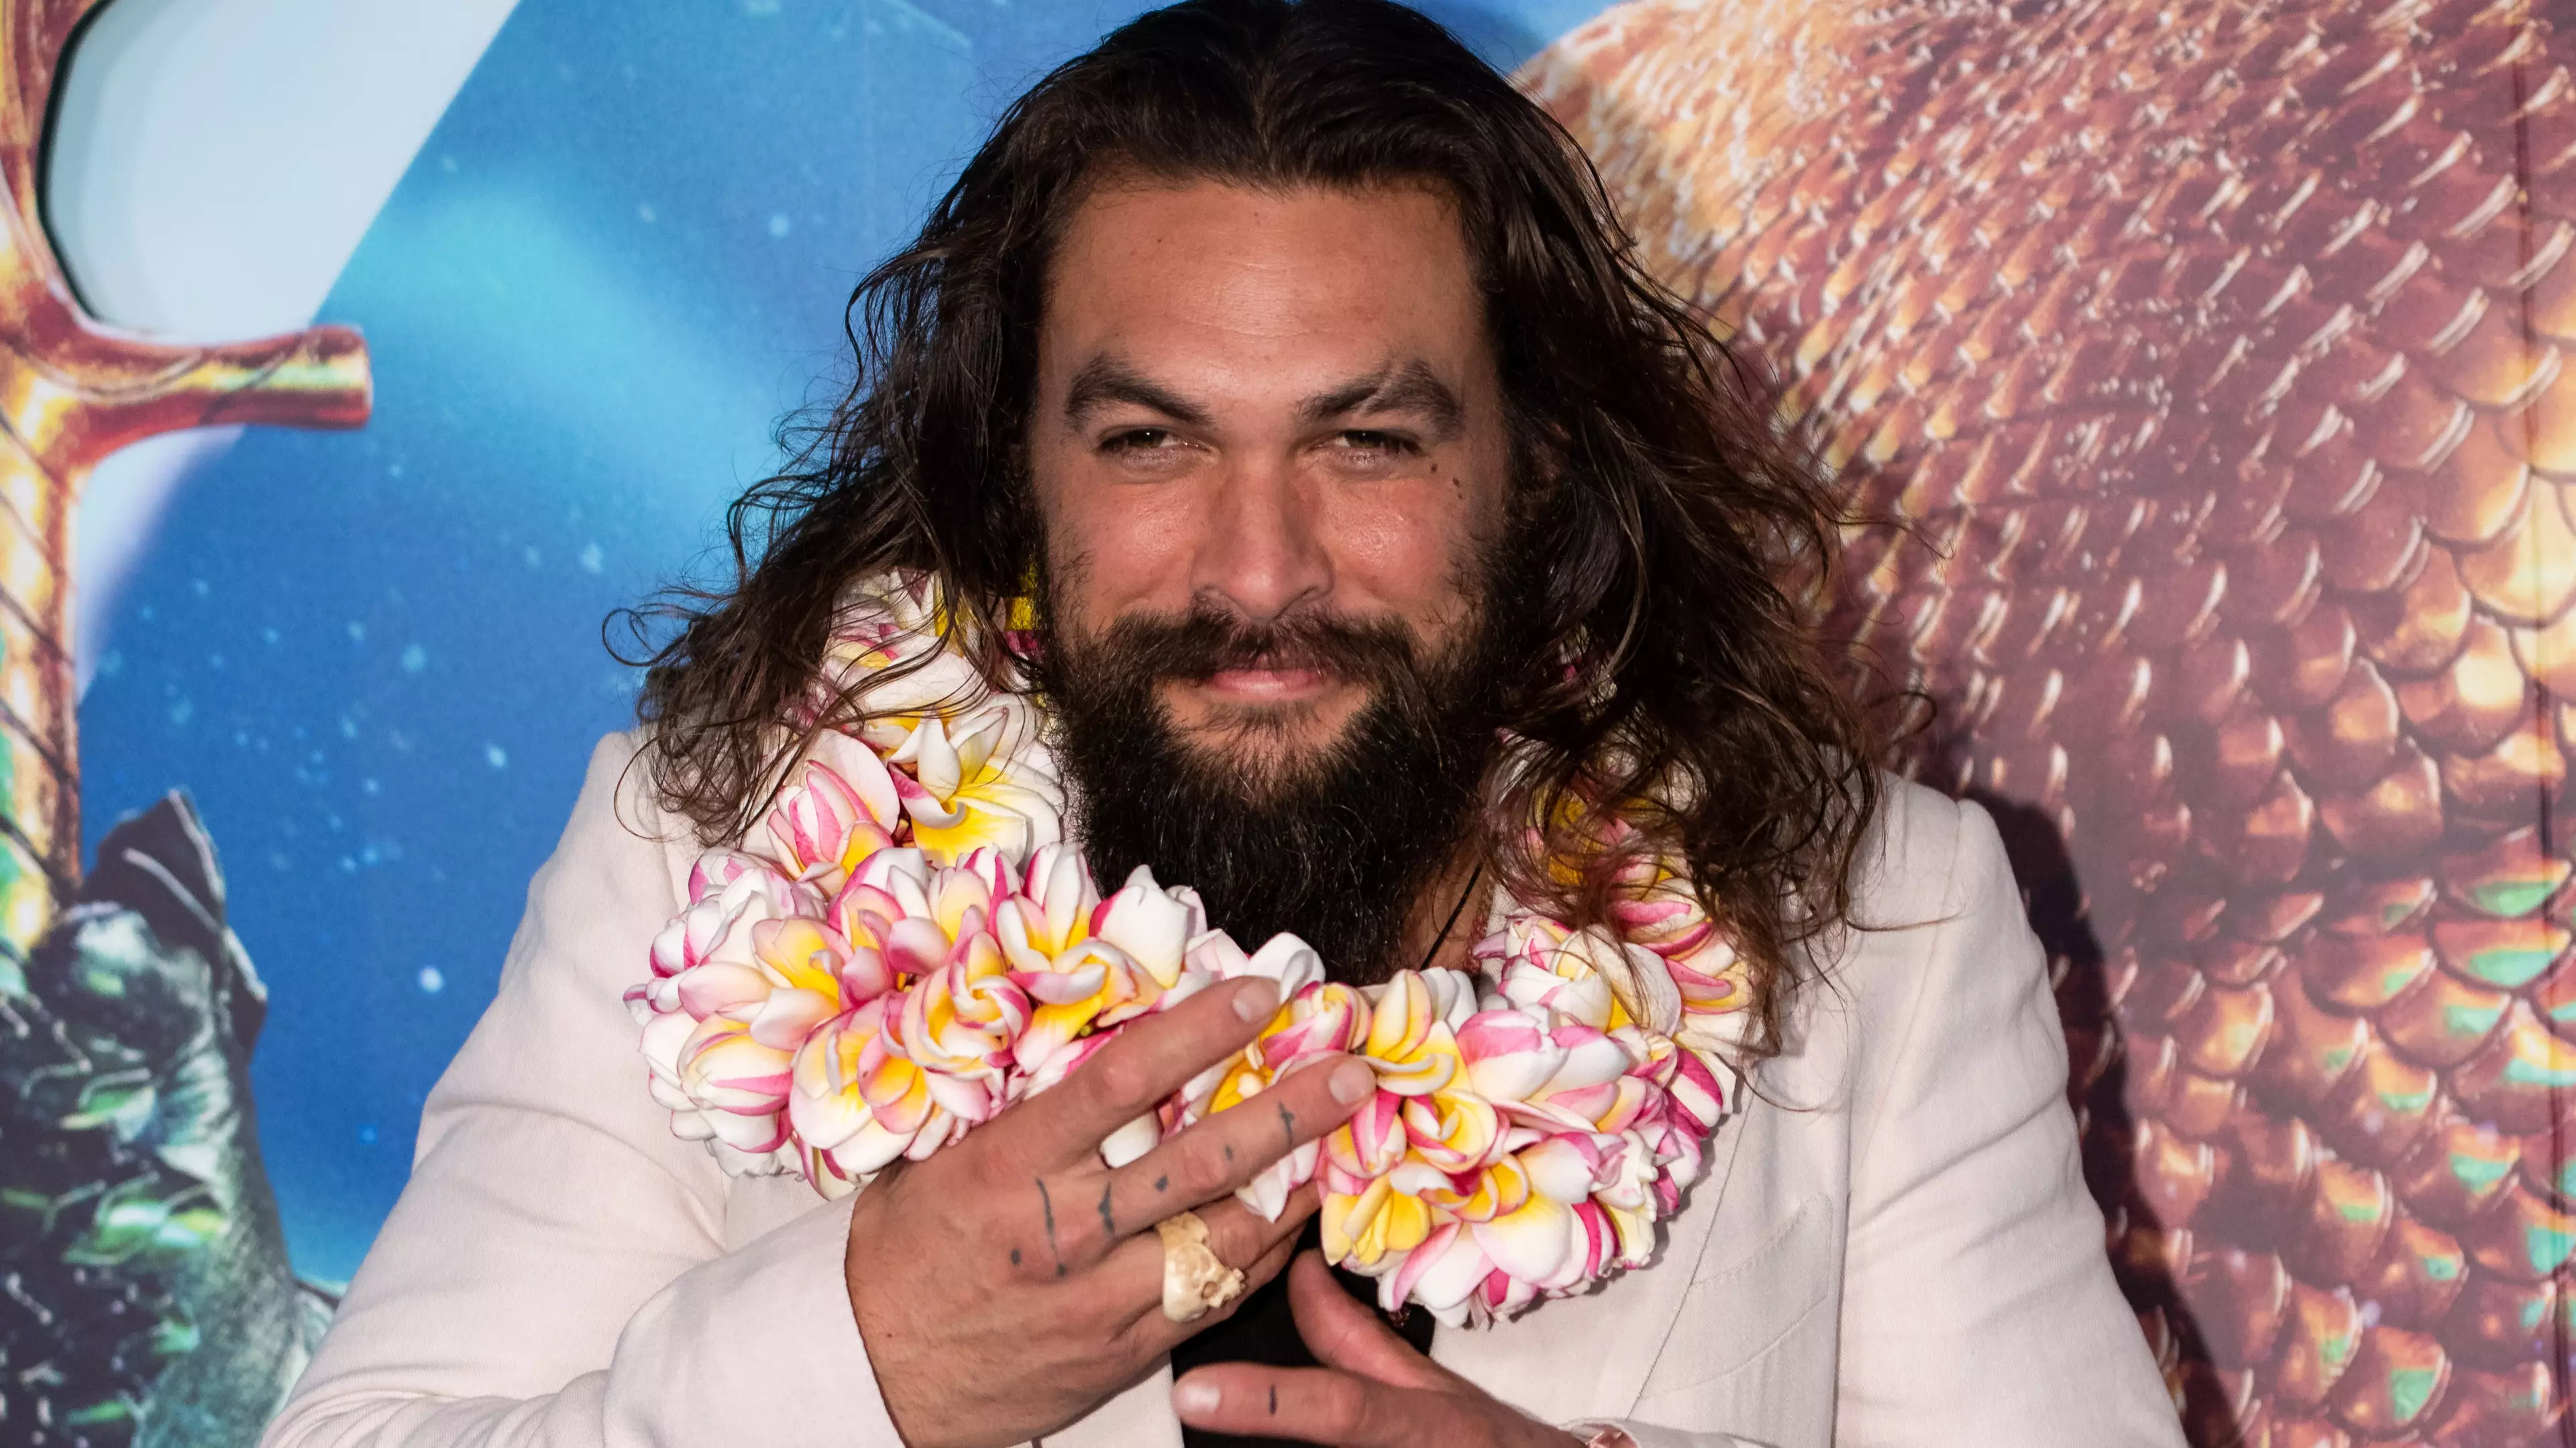 Jason Momoa Builds Family Heirloom Harley Davidson For Father's Day